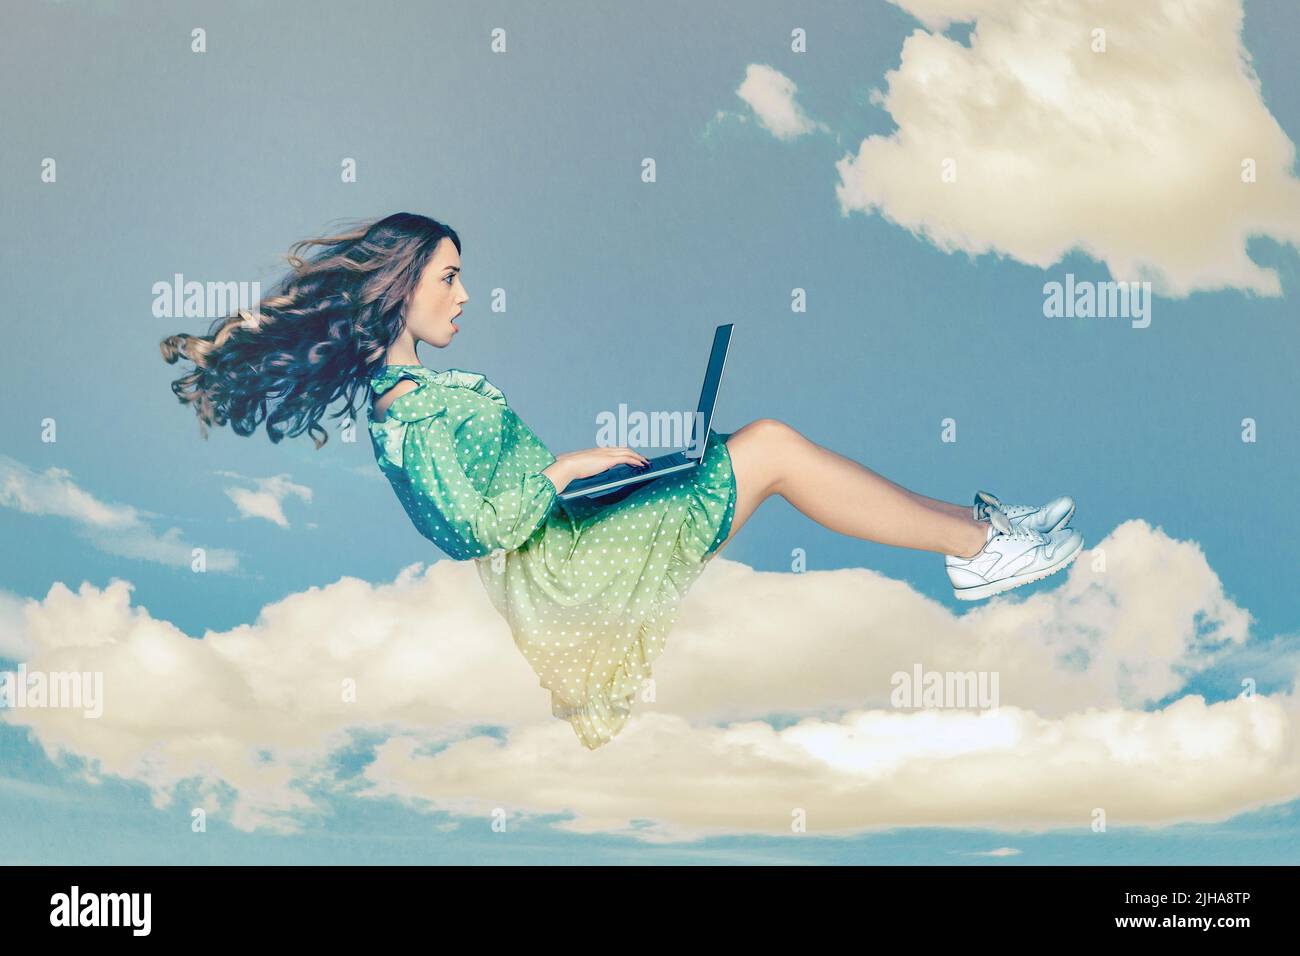 Hovering in air. Surprised girl ruffle dress levitating, looking at laptop screen shocked amazed, surfing web social networks while flying in mid-air. collage composition on day cloudy blue sky Stock Photo